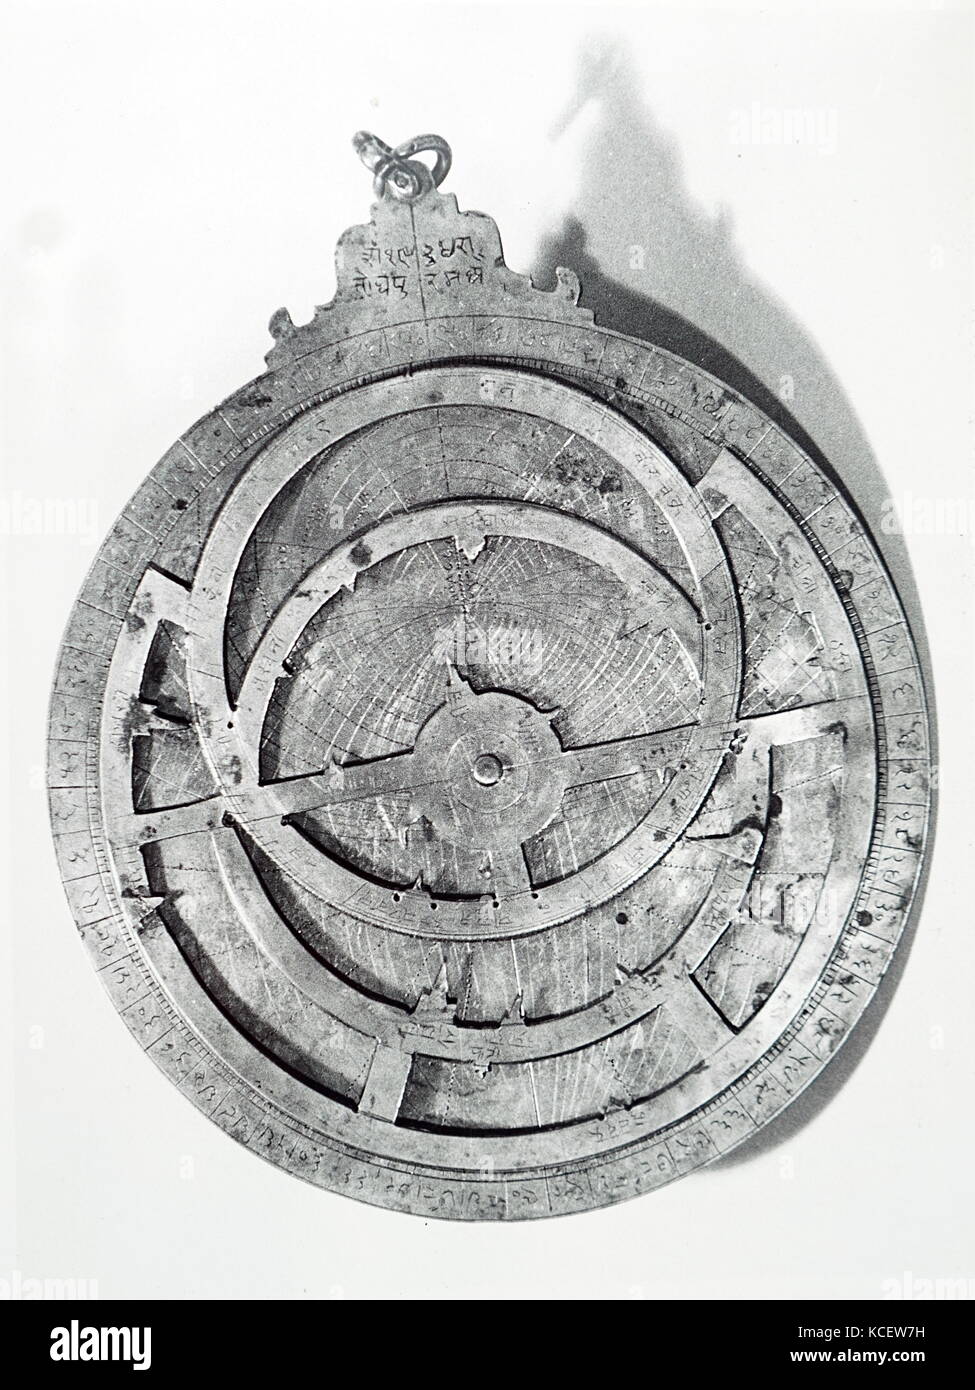 View of the front of a brass astrolabe. An astrolabe is an elaborate inclinometer, used by astronomers and navigators, to measure the inclined position in the sky of a celestial body, day or night. Dated 19th Century Stock Photo